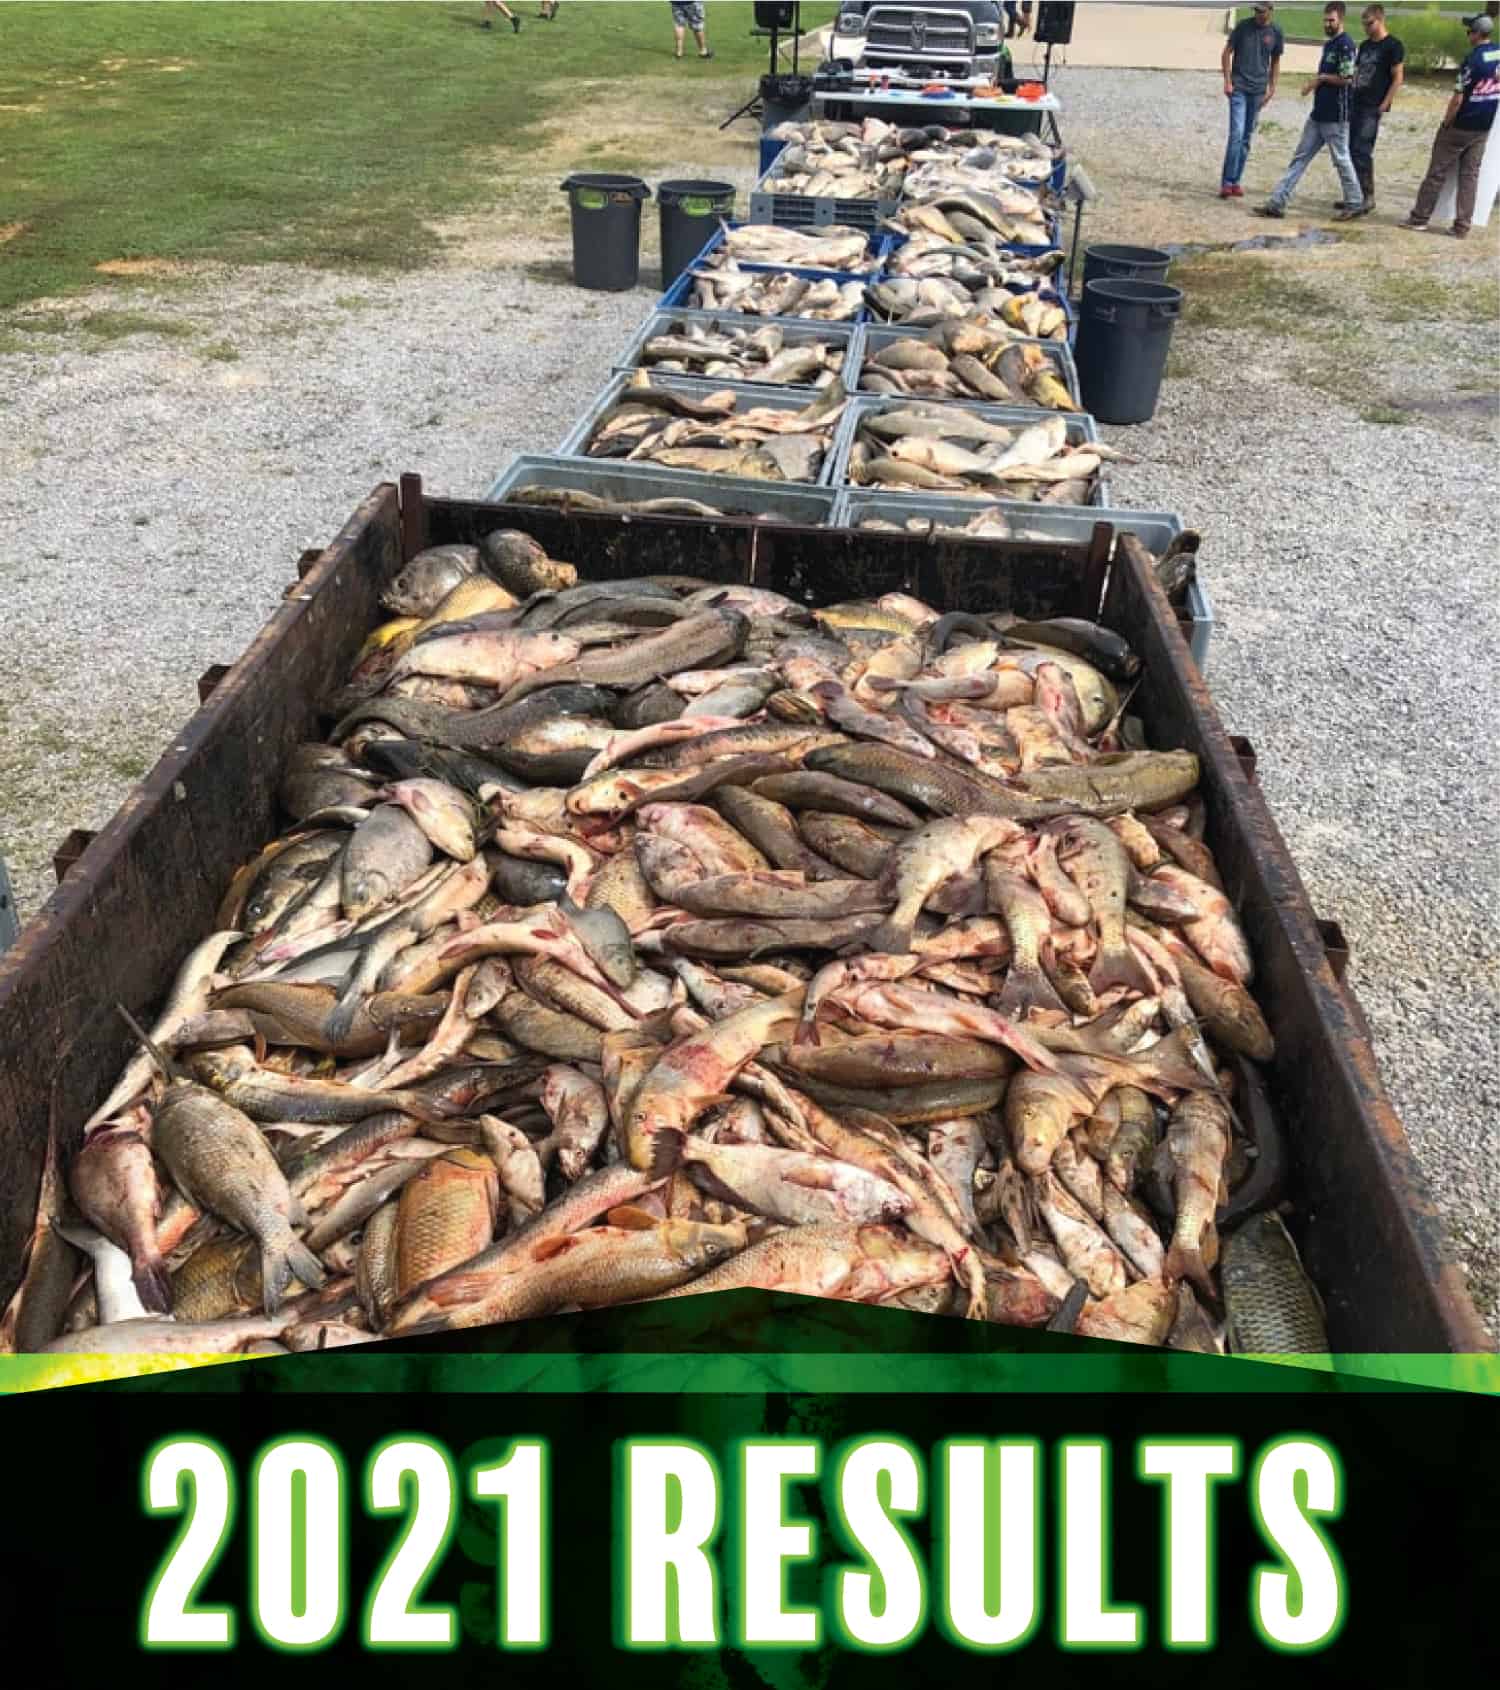 piles of dead fish in bins for 2021 results